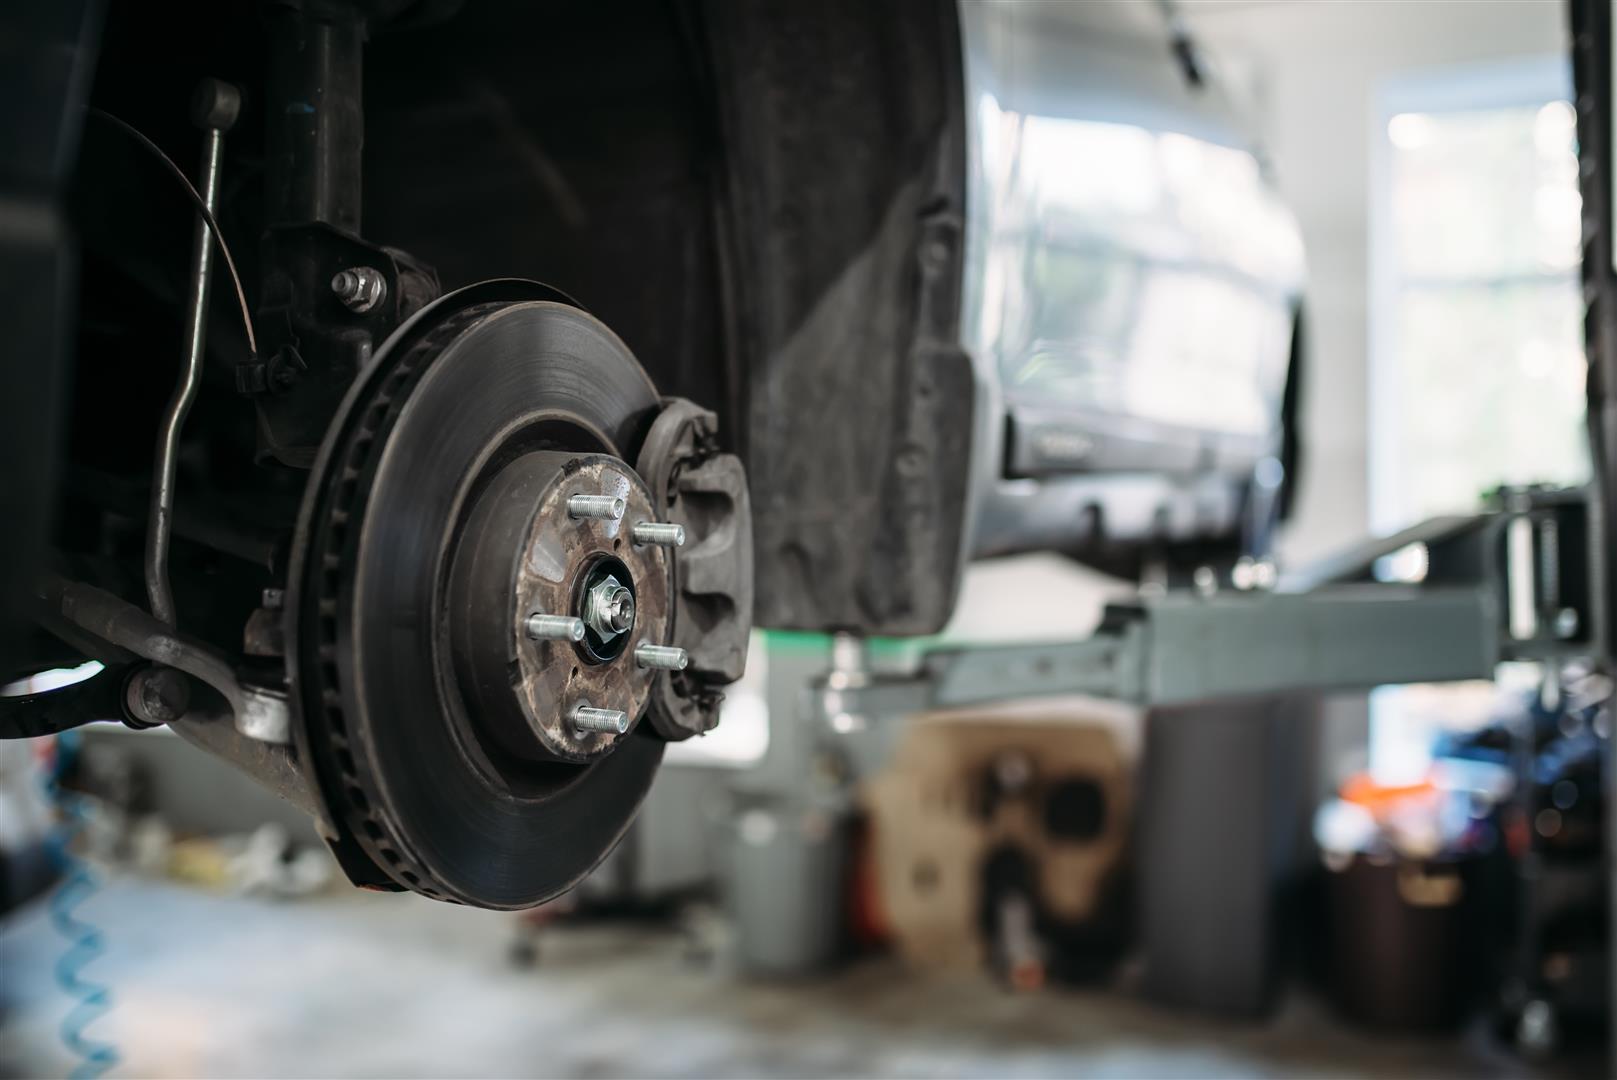 Do You Need New Brake Pads or a Full Brake Service?